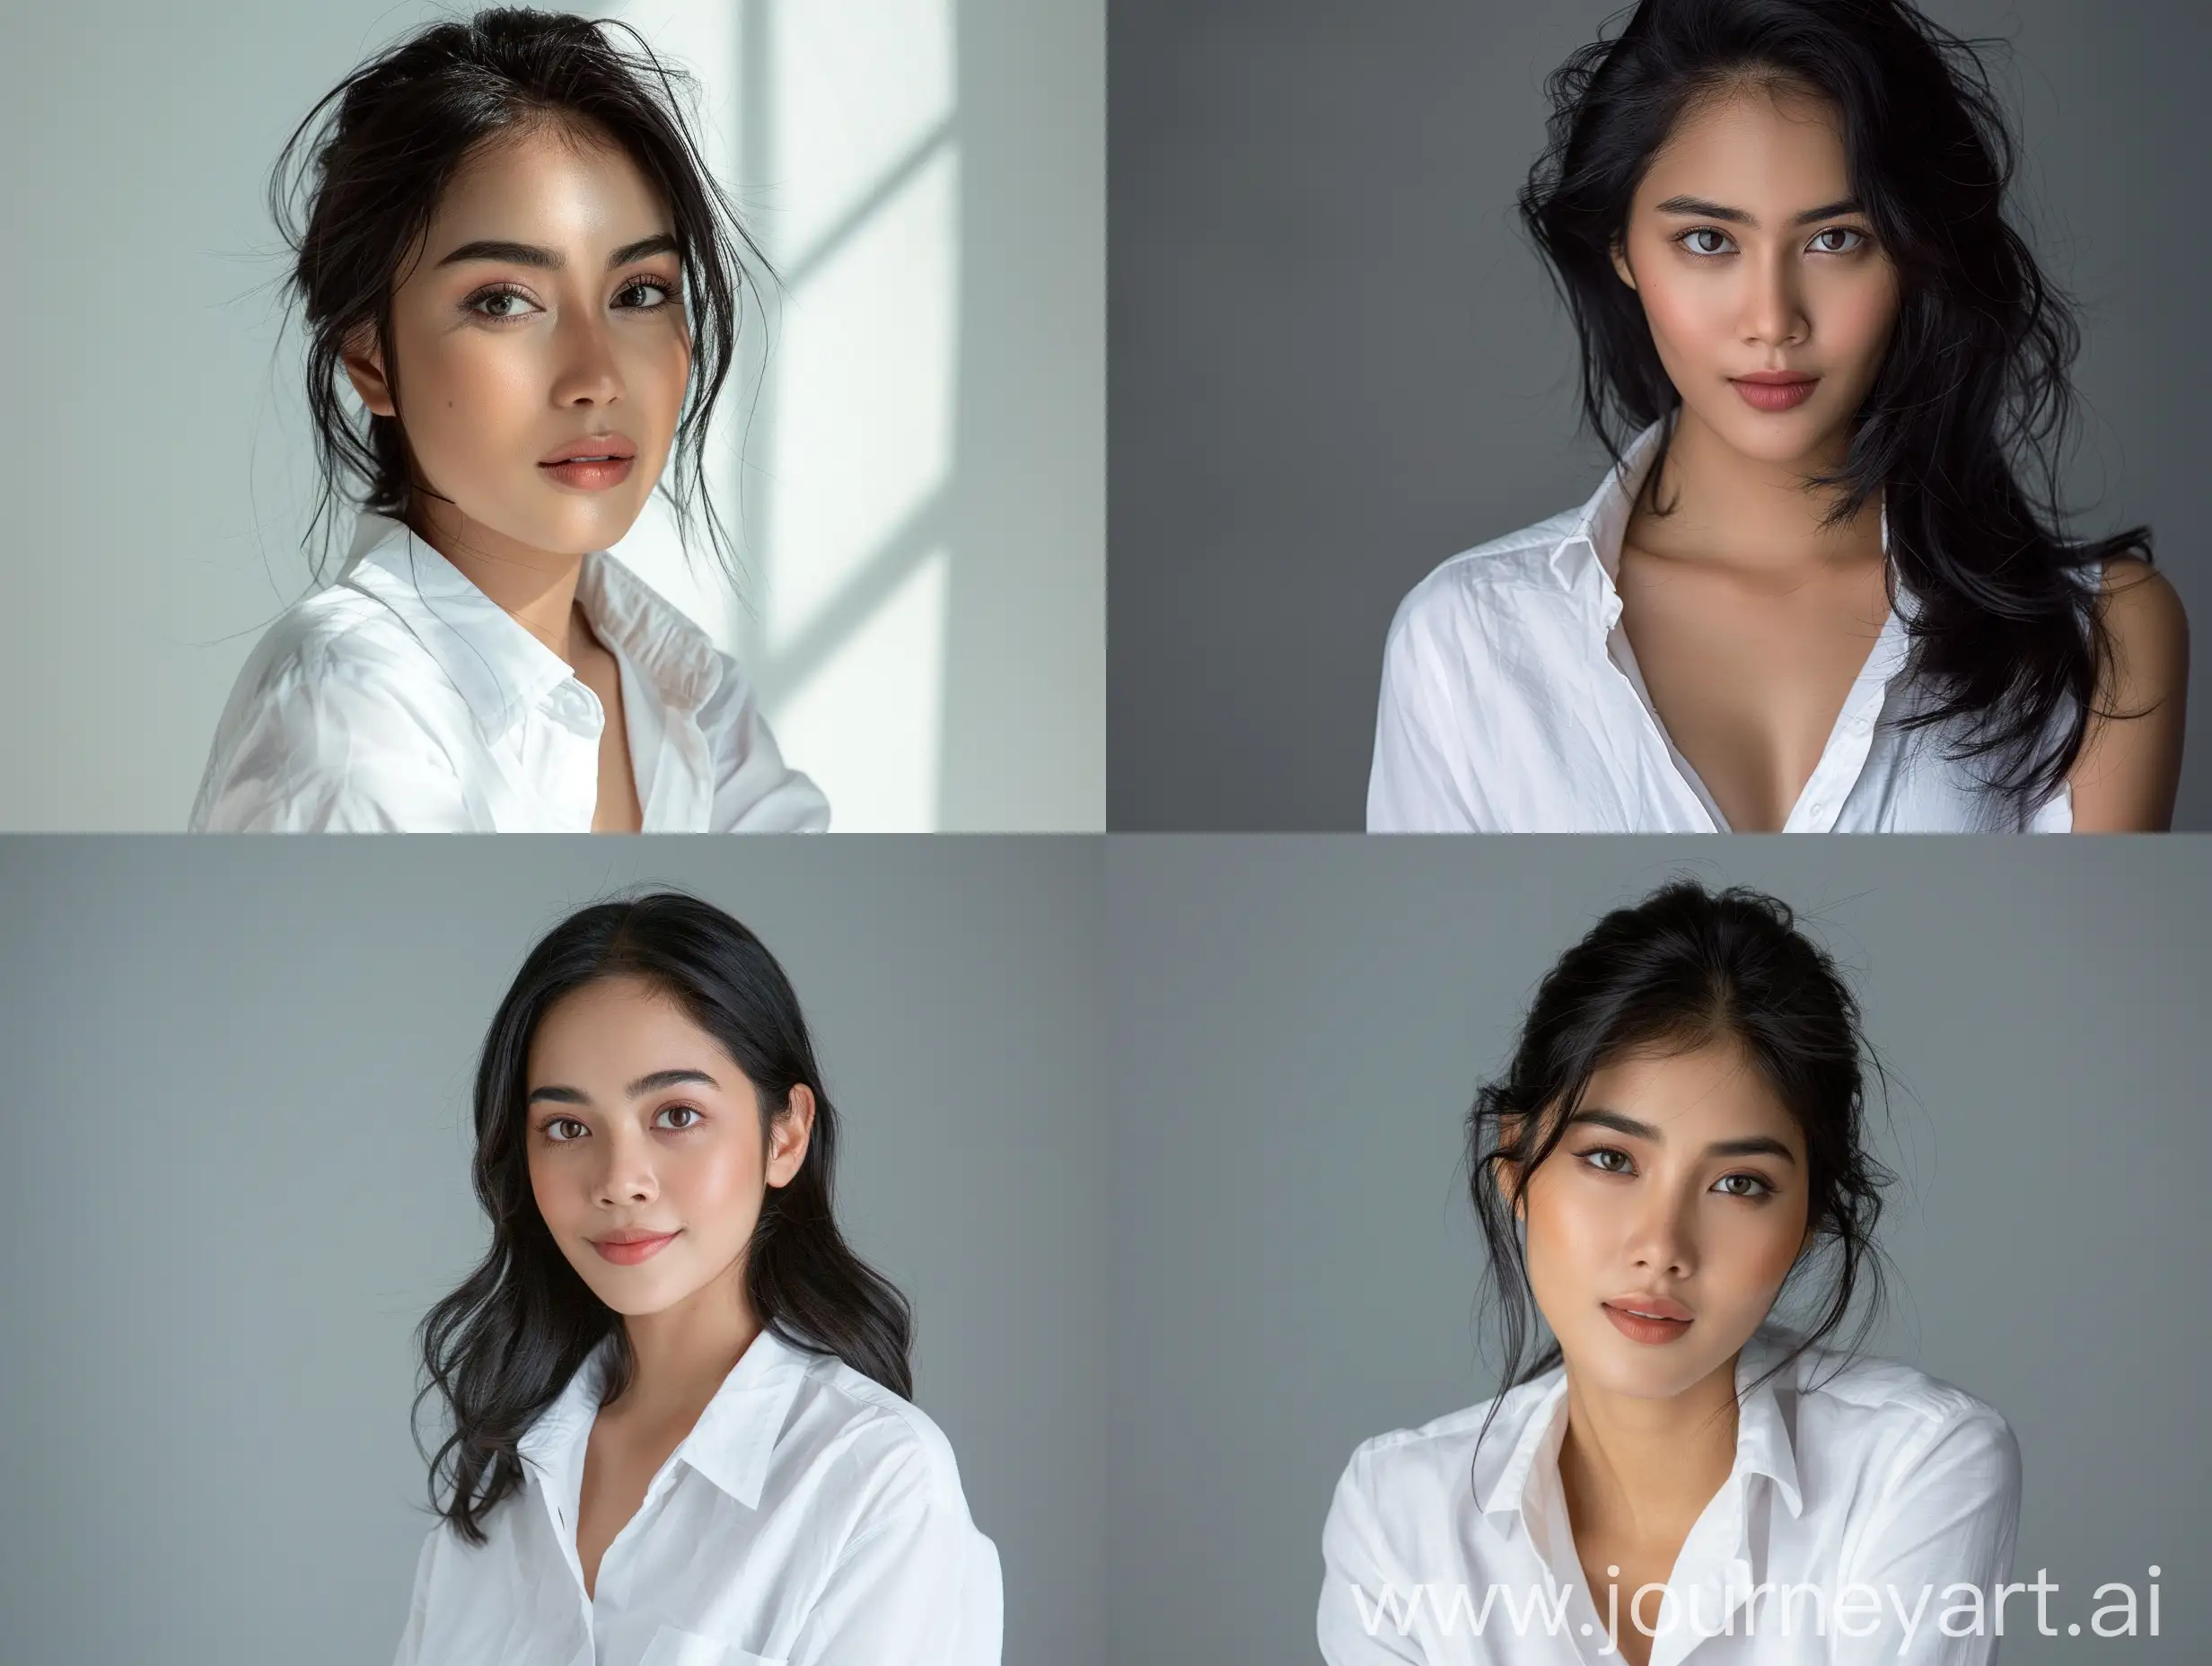 Portrait of indonesian beauty and sexy woman.wearing a white shirt.presenter television.